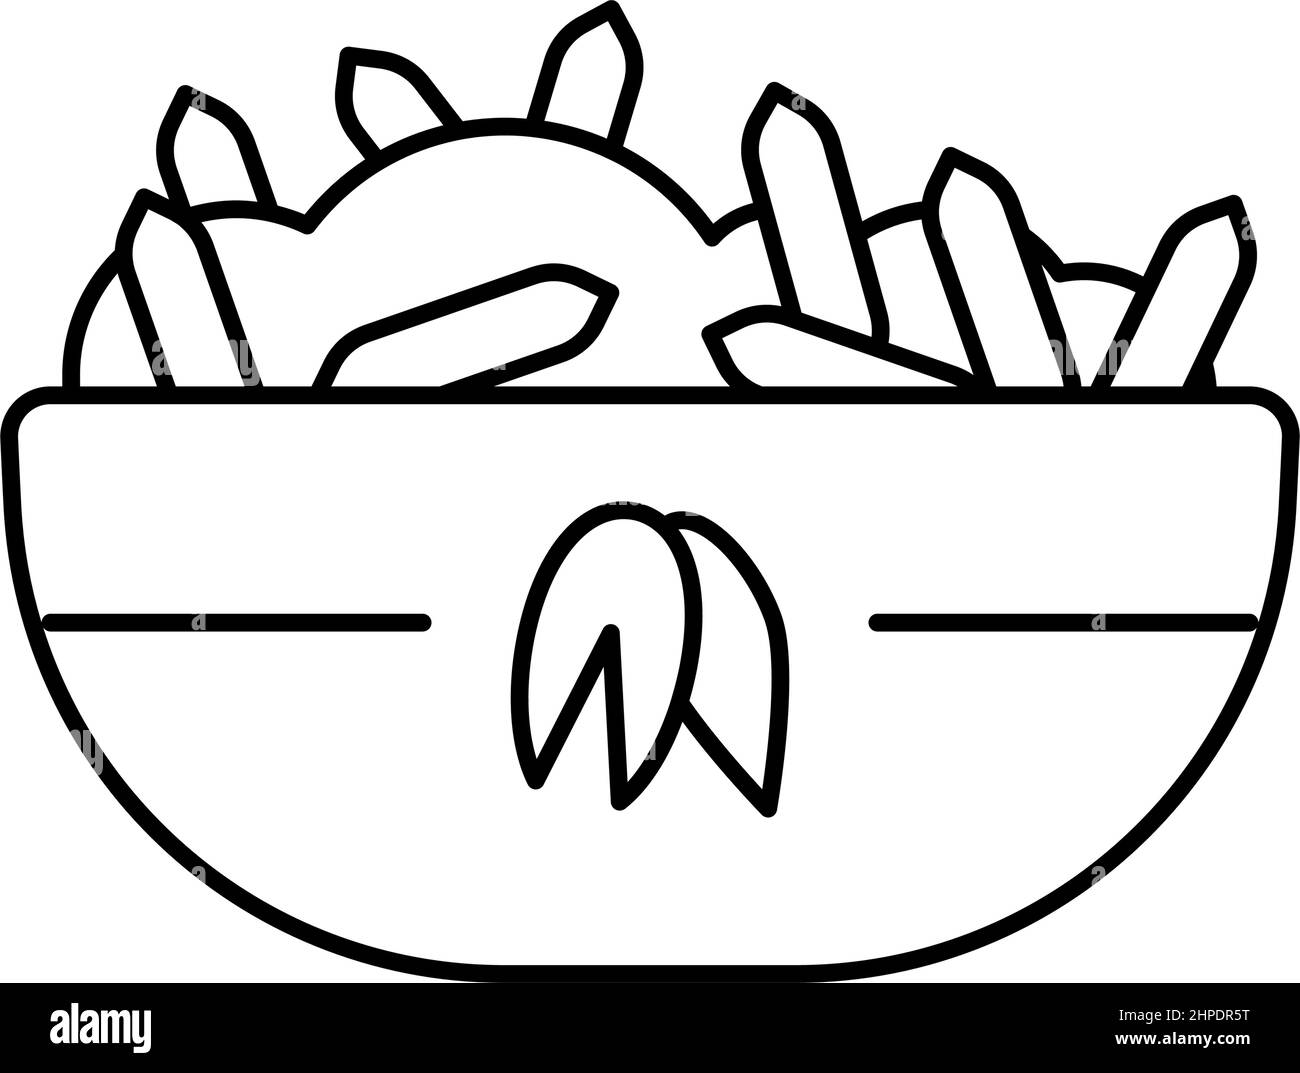 cooked oatmeal breakfast line icon vector illustration Stock Vector